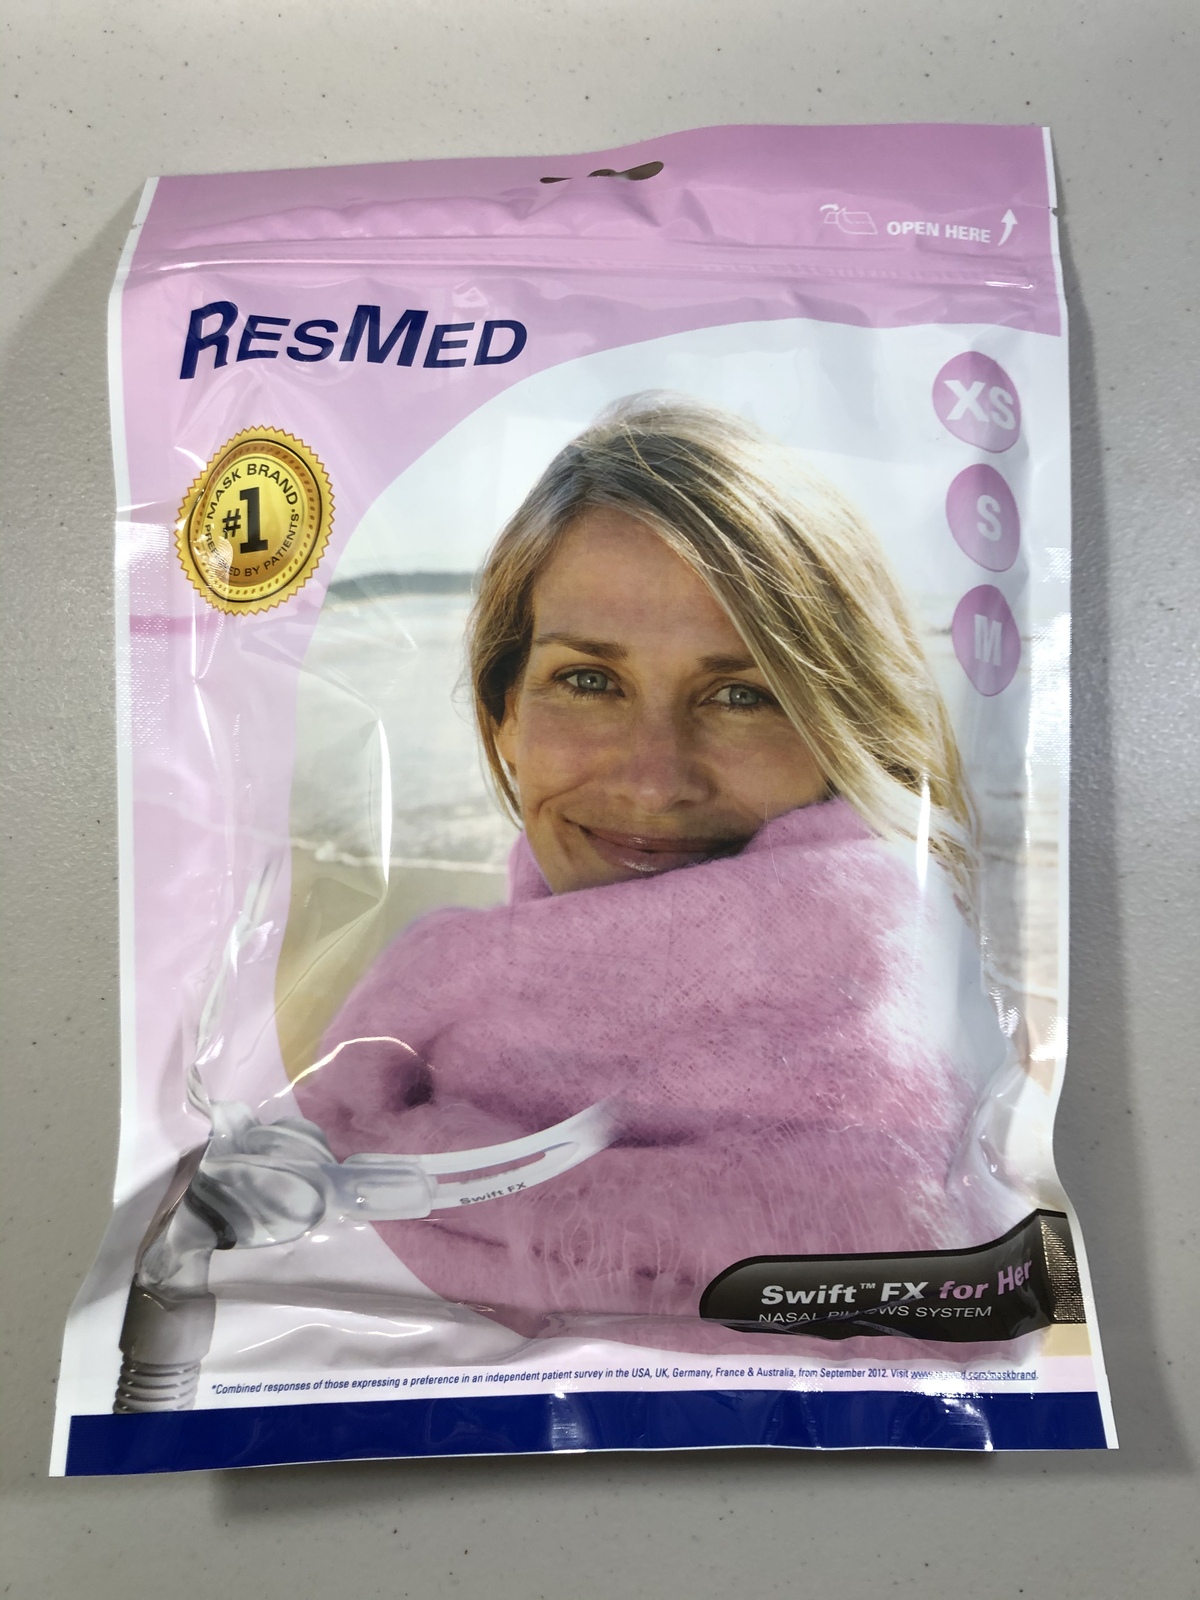 ResMed Swift FX For Her Nasal Cpap Mask Pillow System 61540 with Headgear - $56.95